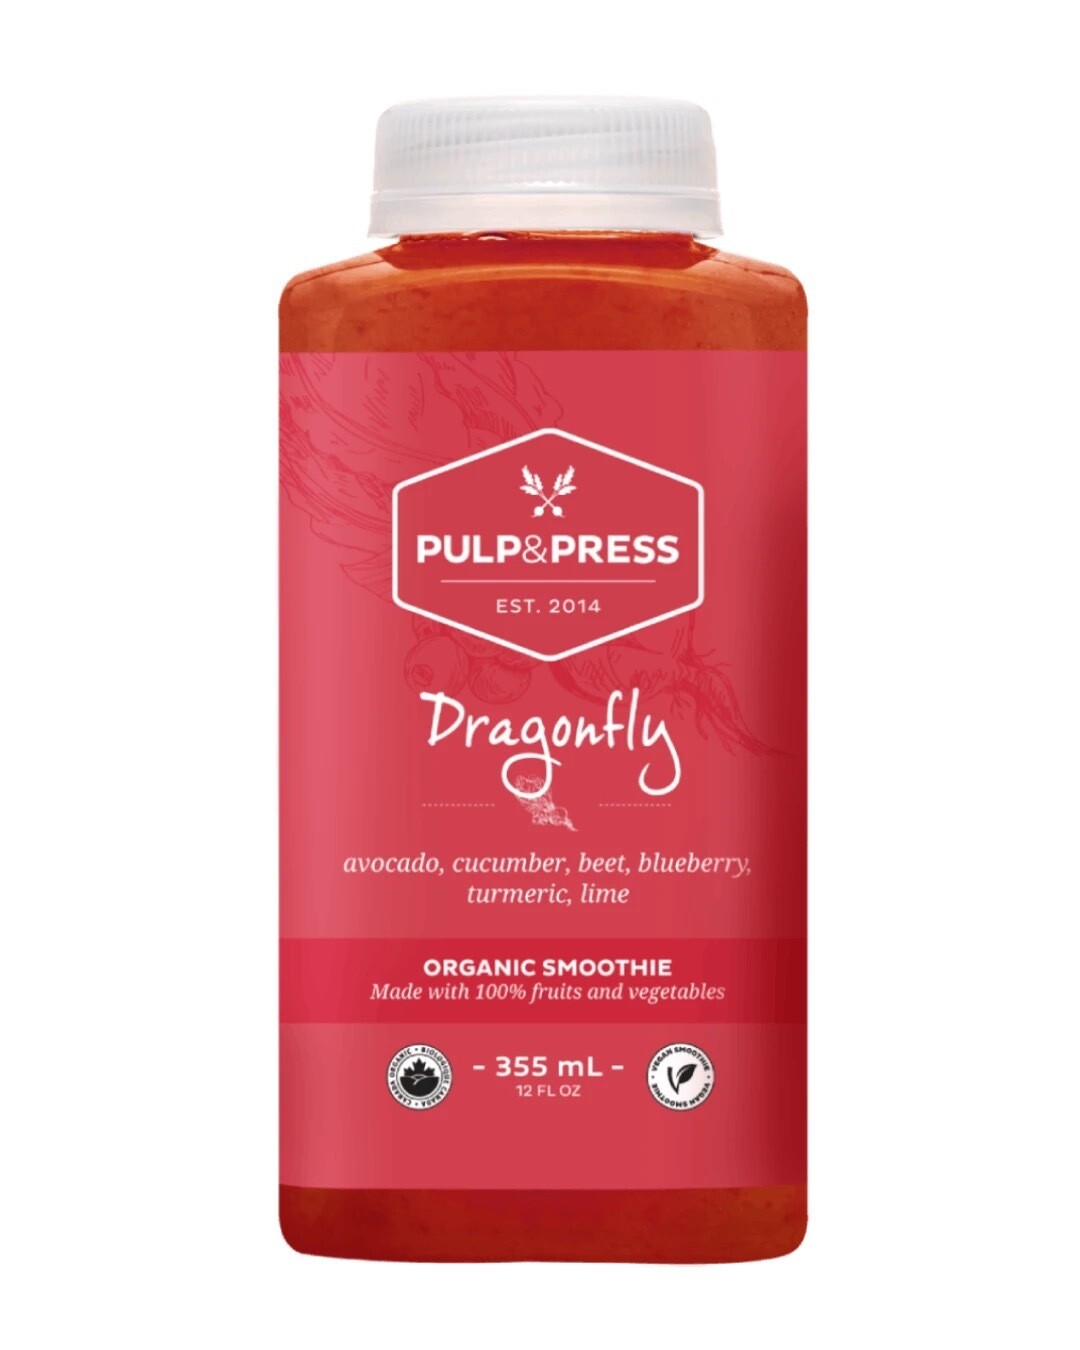 Pulp & Press - Dragonfly Smoothie 355ml